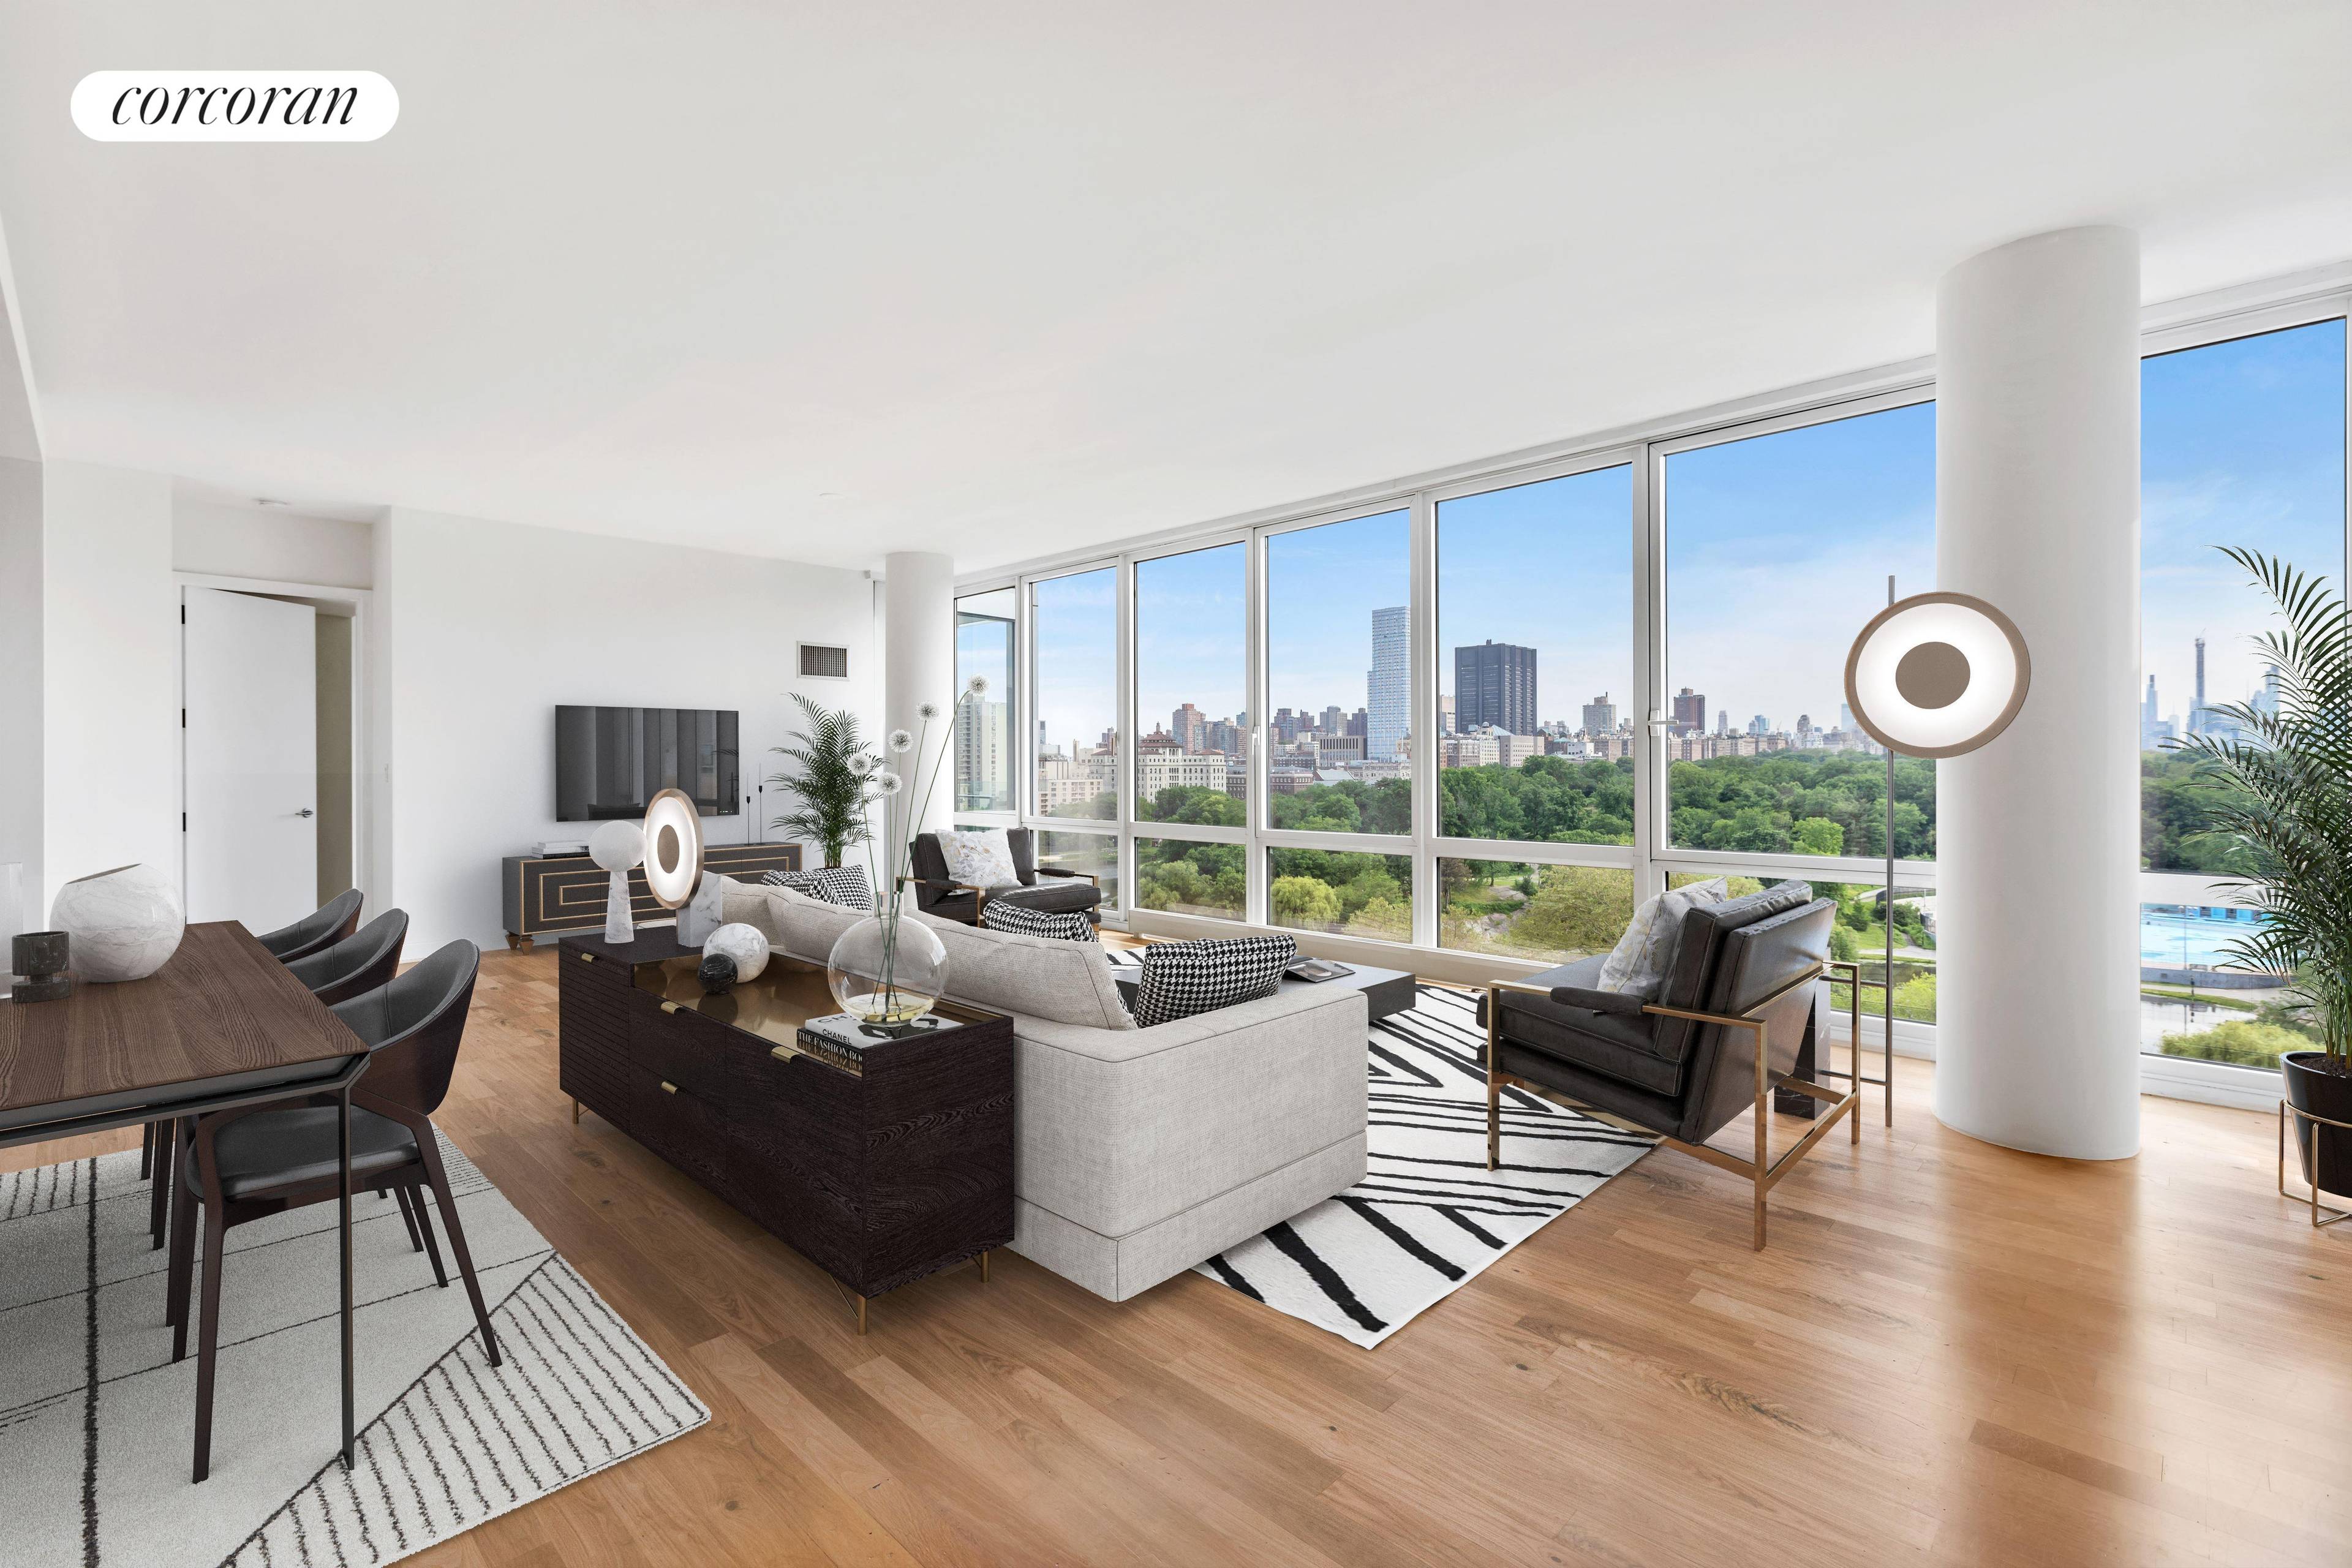 PARKING SPOT INCLUDED ! Upon entering this bright split two bedroom and two and a half bathroom residence, views of Central Park and the skyline of Central Park South through ...